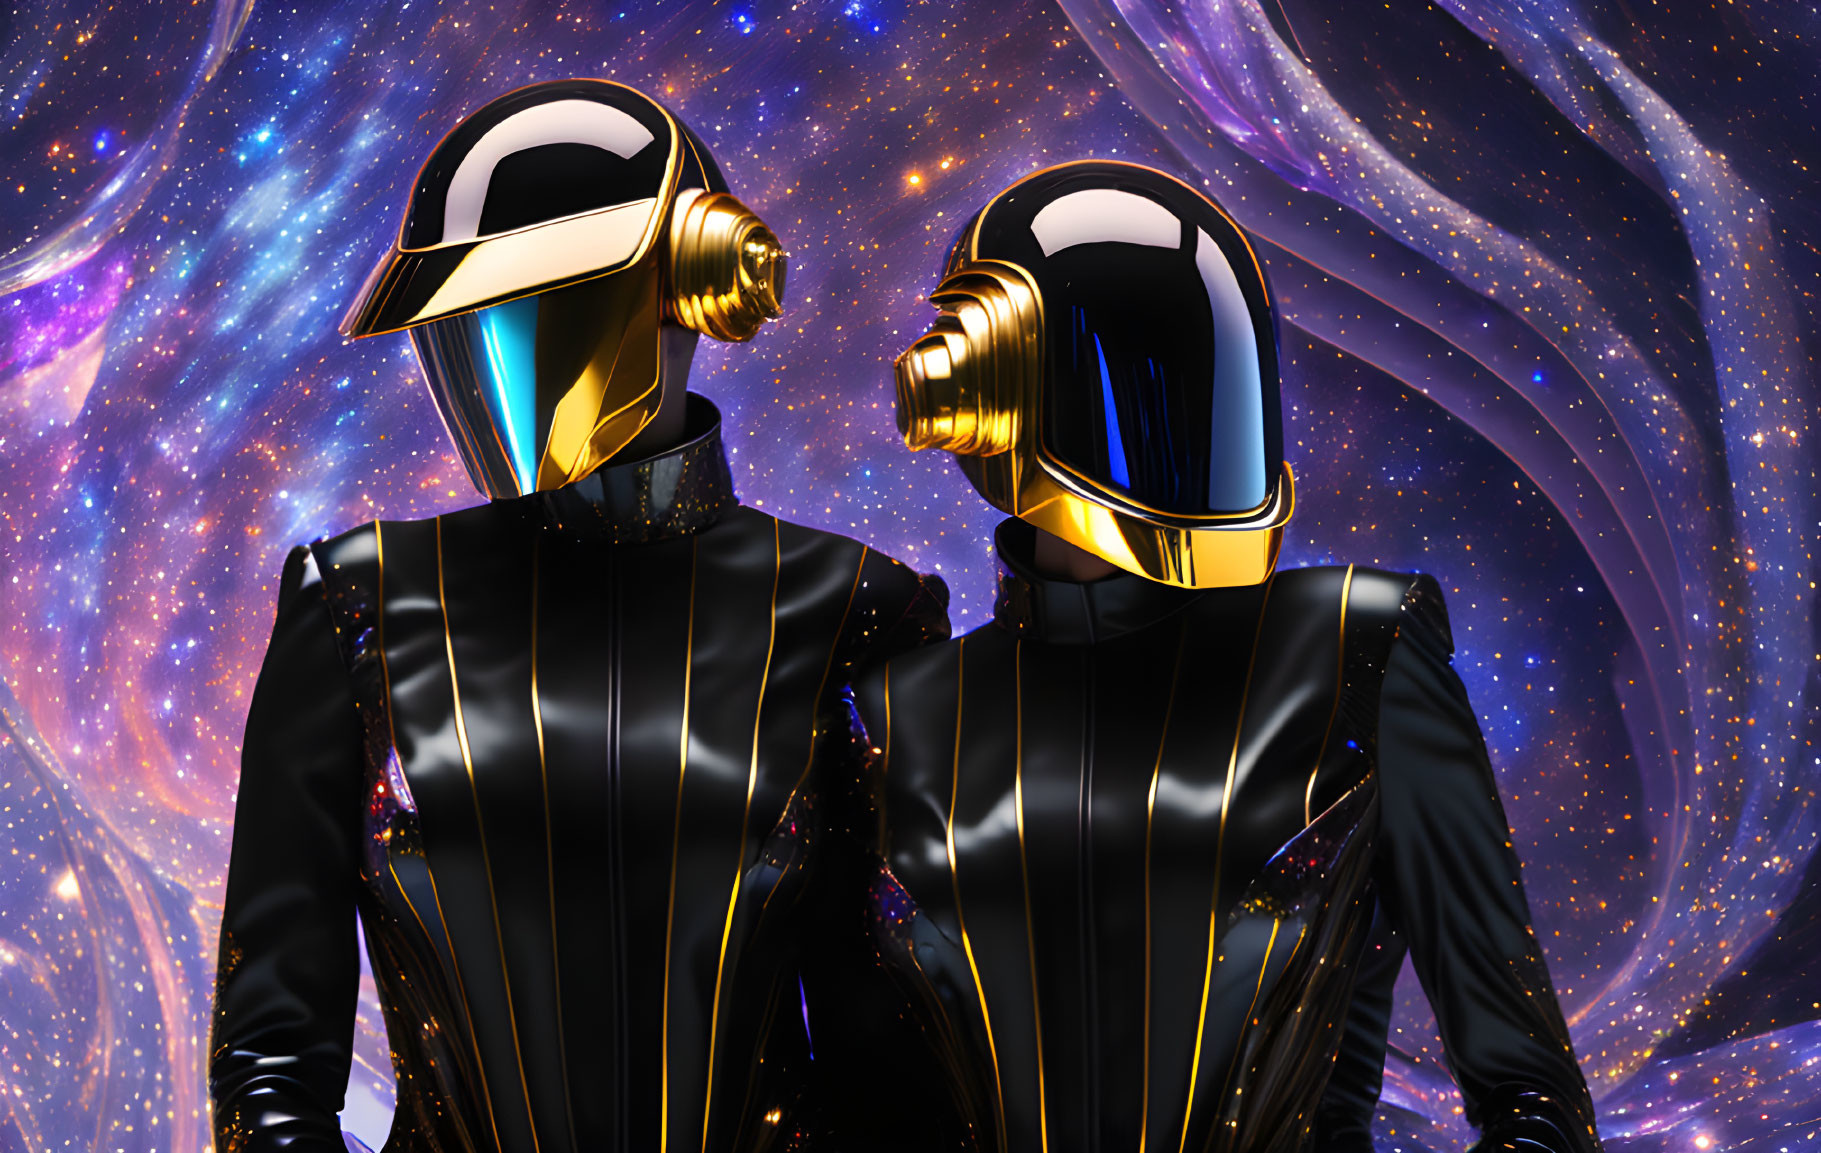 Futuristic black and gold helmeted figures in cosmic setting